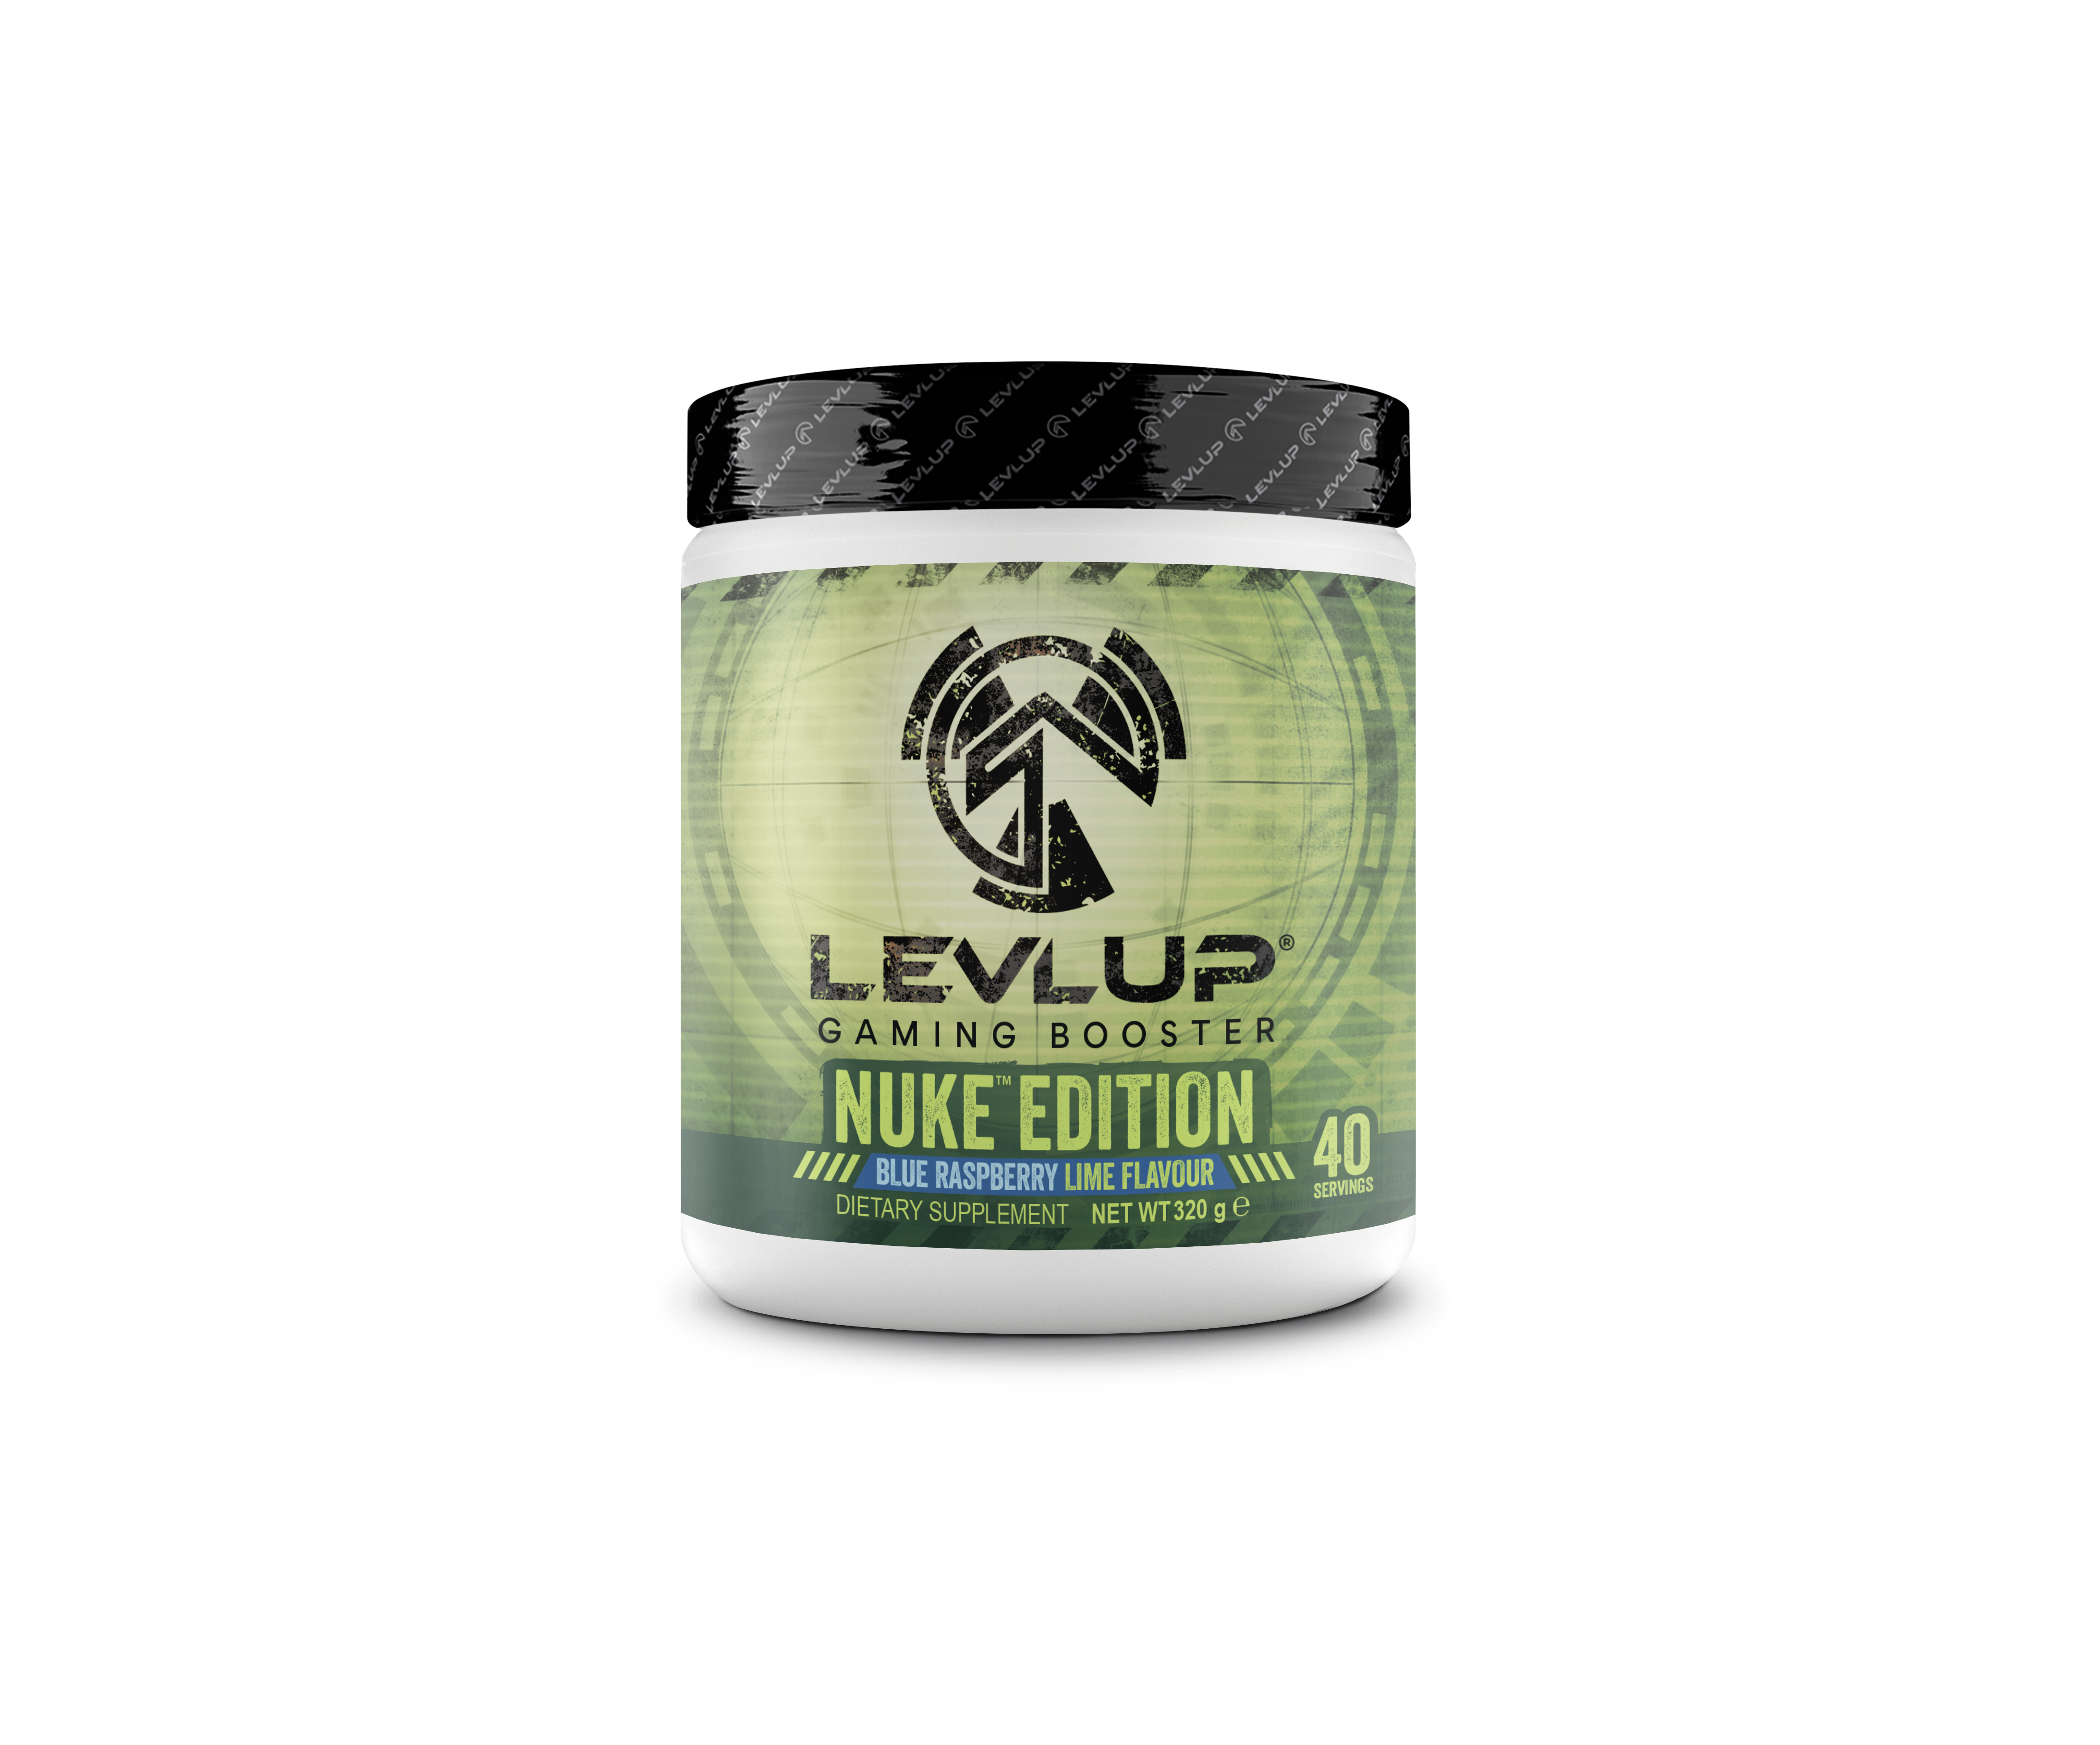 LevlUp Gaming Booster - Super Nutrition